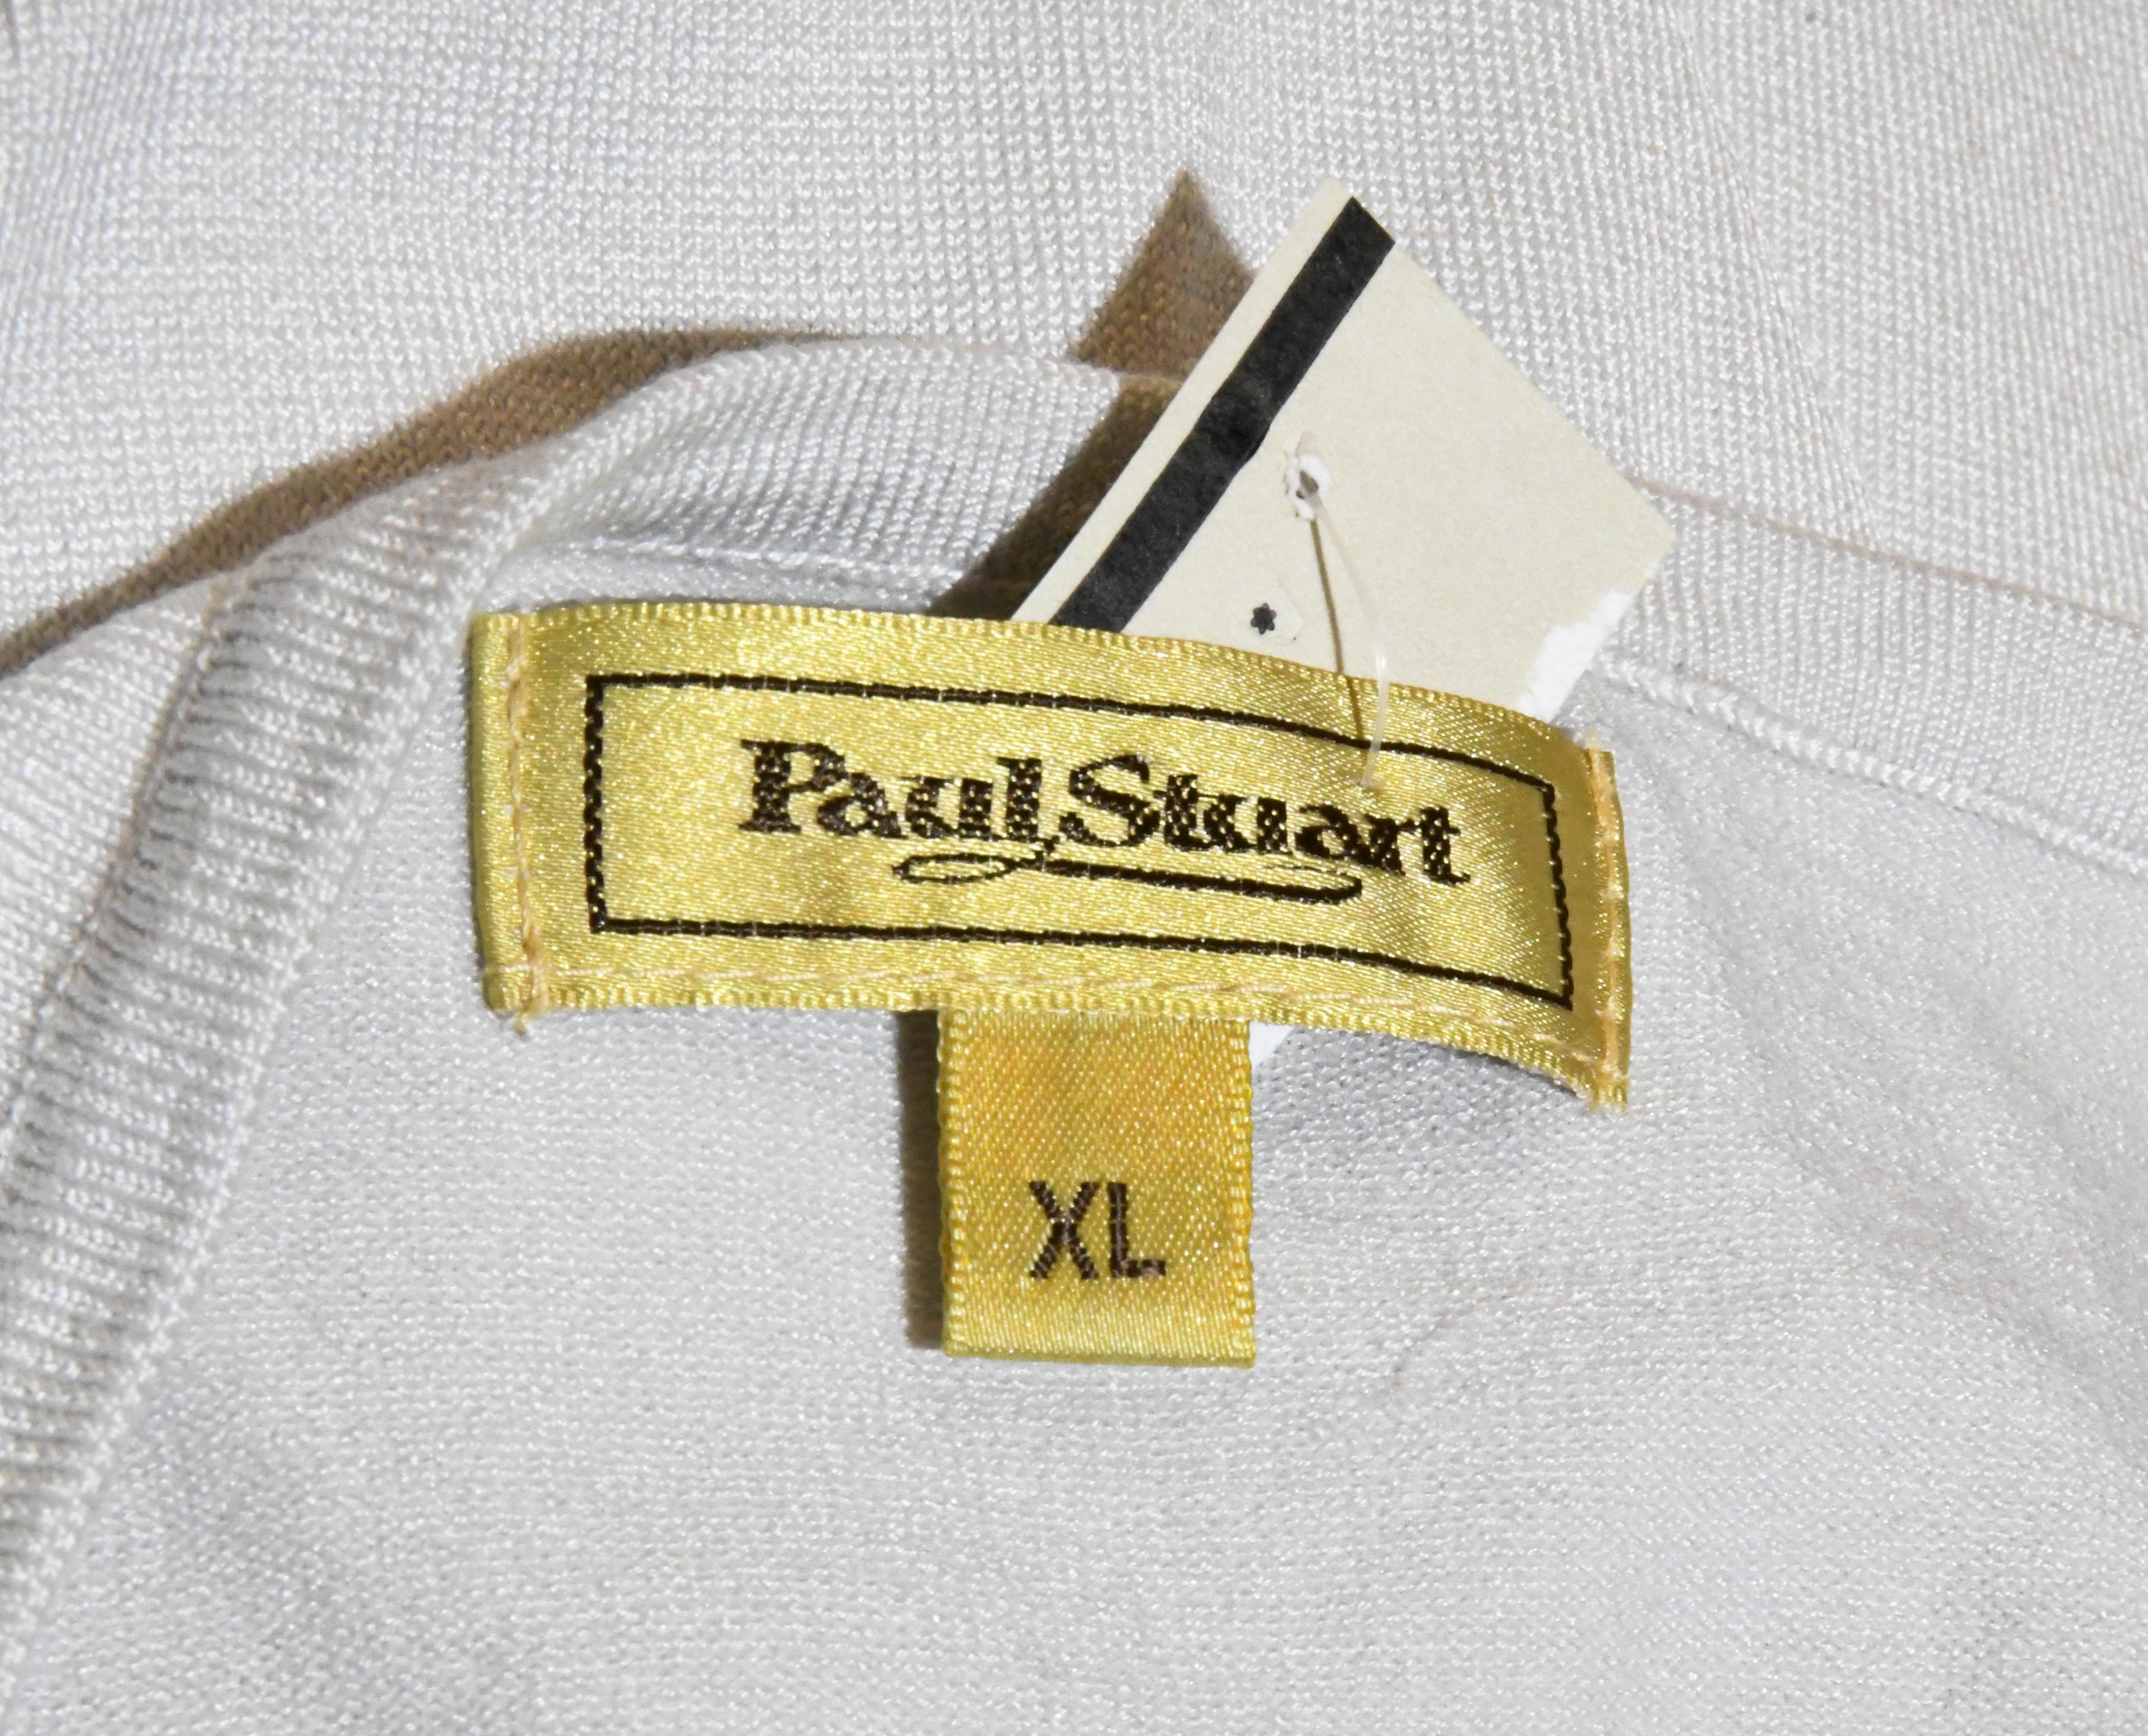 Paul Stuart Short Sleeve Light Blue Relaxed Fit Top  In Excellent Condition For Sale In Palm Beach, FL